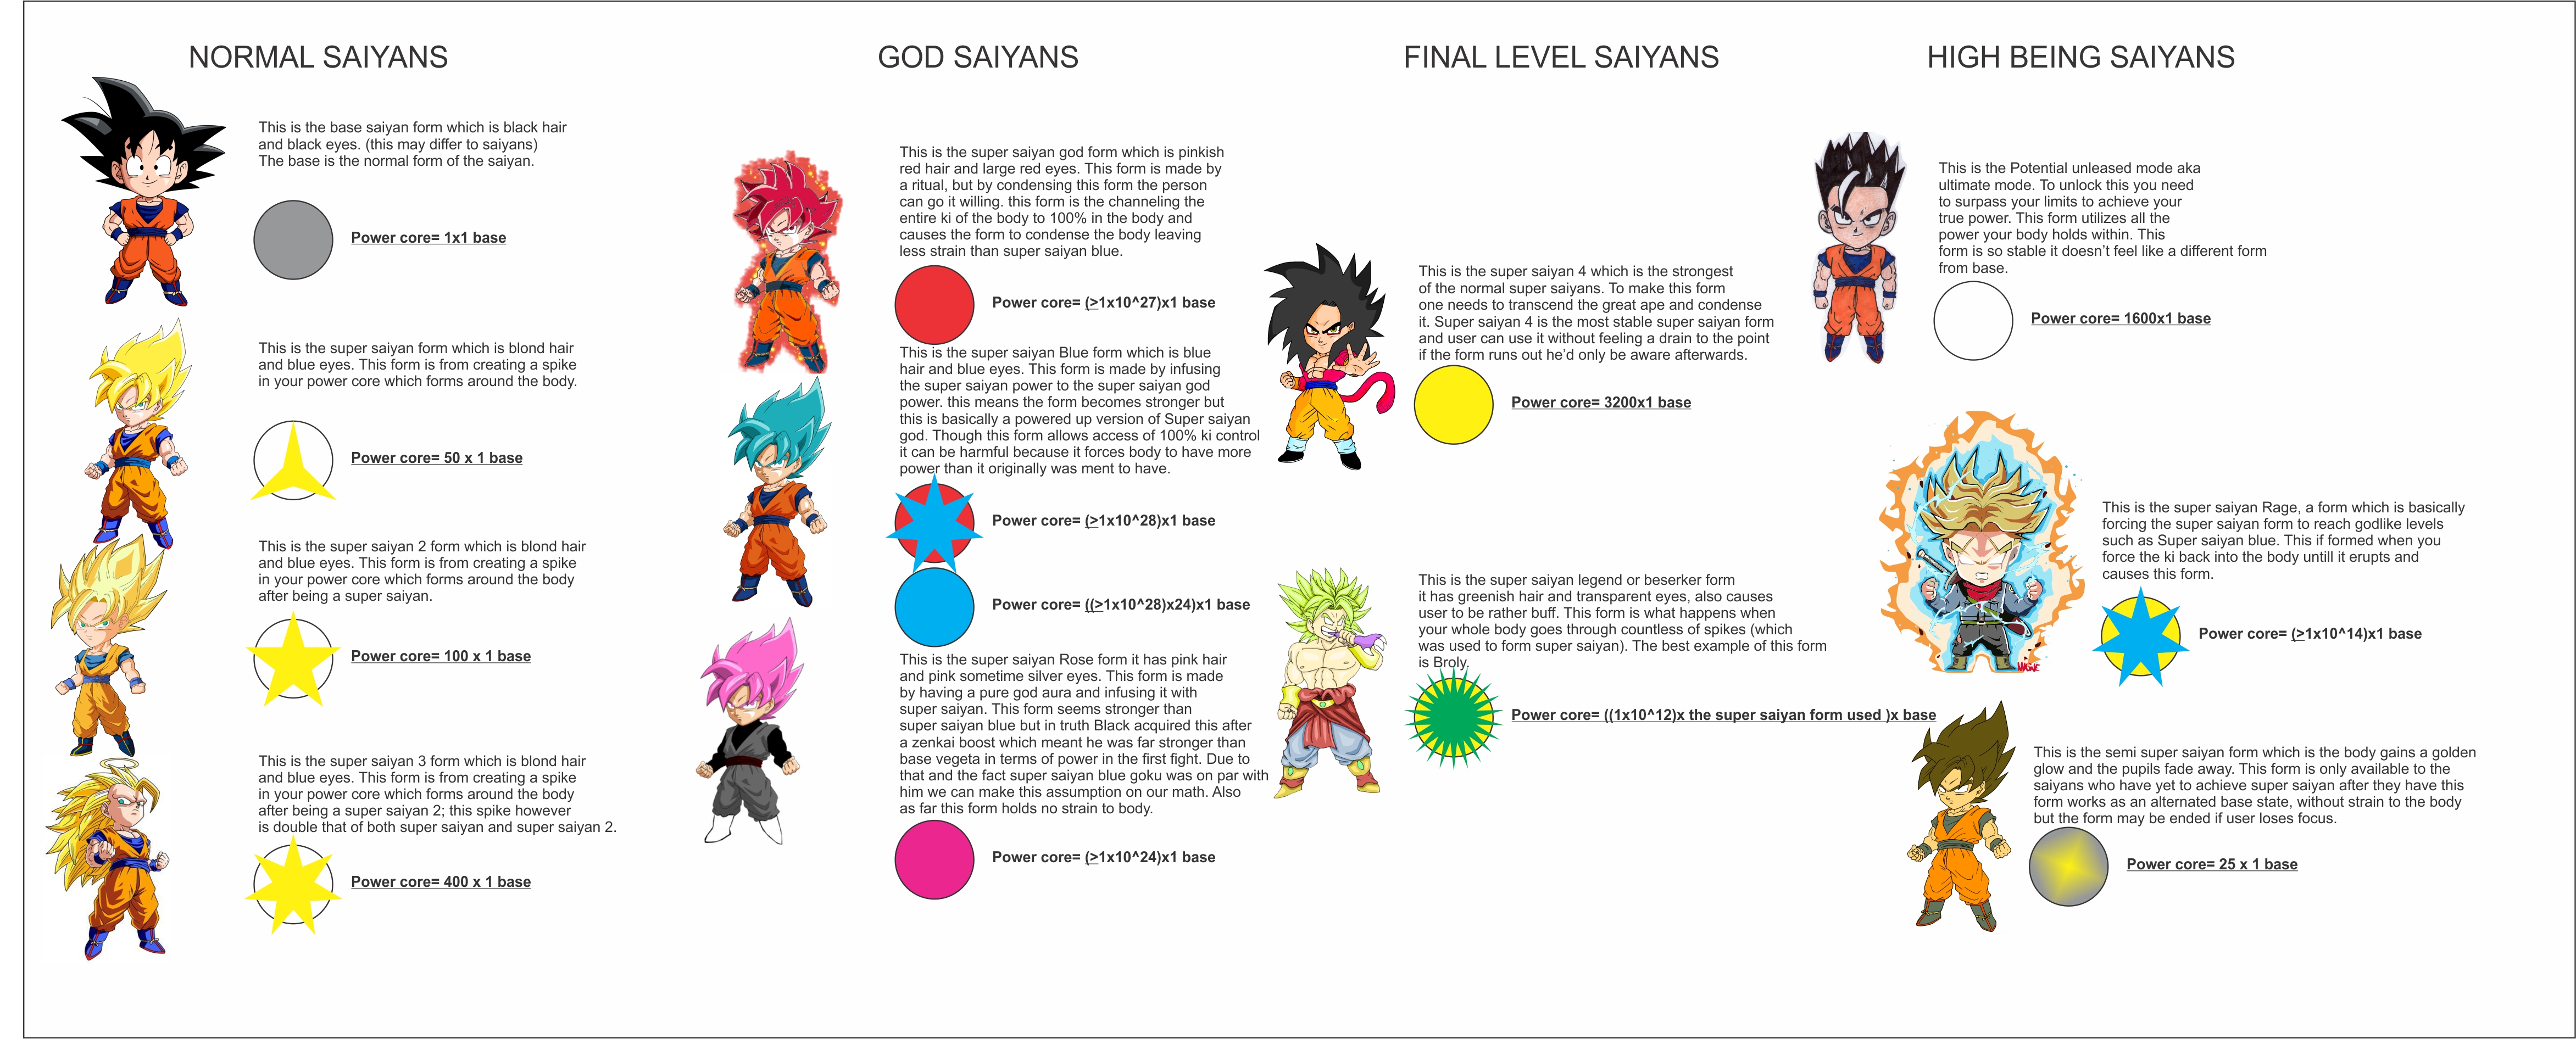 What are the power multipliers for the Super Saiyan forms